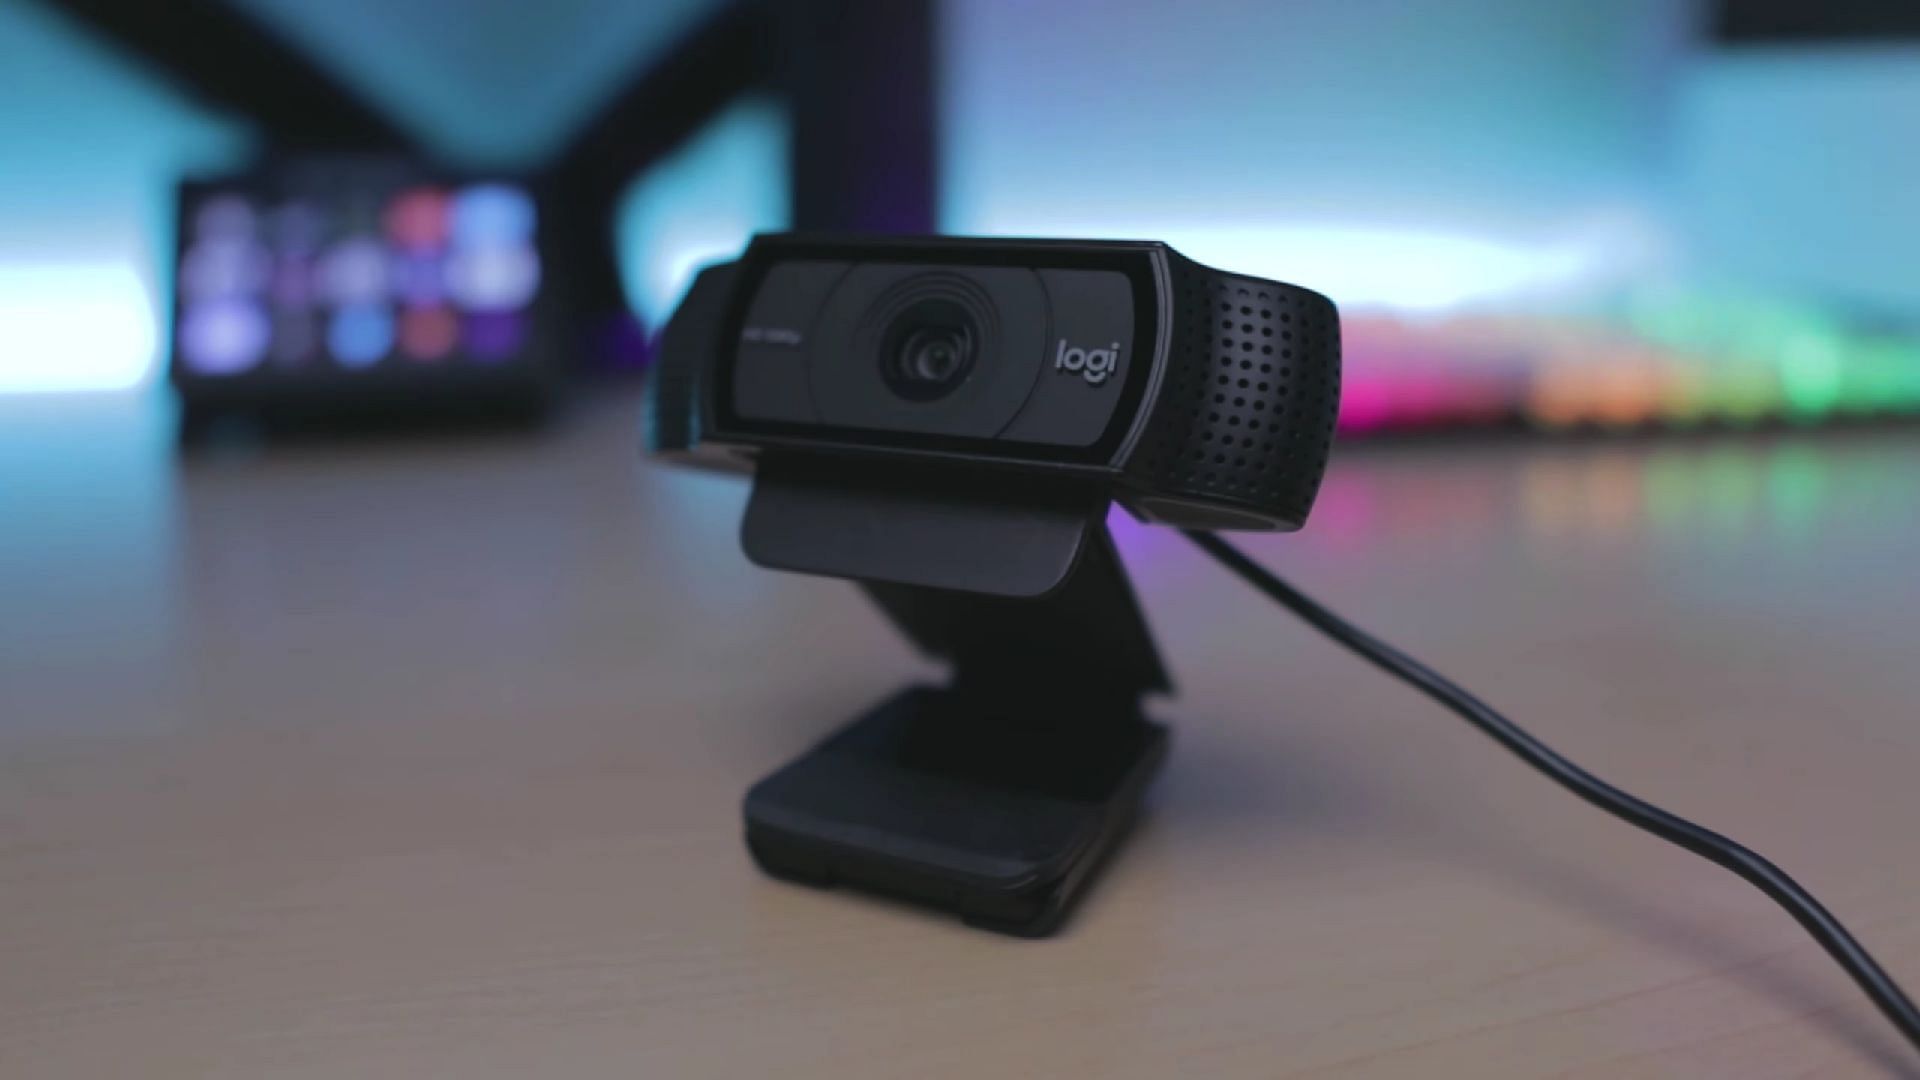 The Logitech C920 is one of the best webcams for video conferencing in 2022 (Image via YouTube/Nickyo))